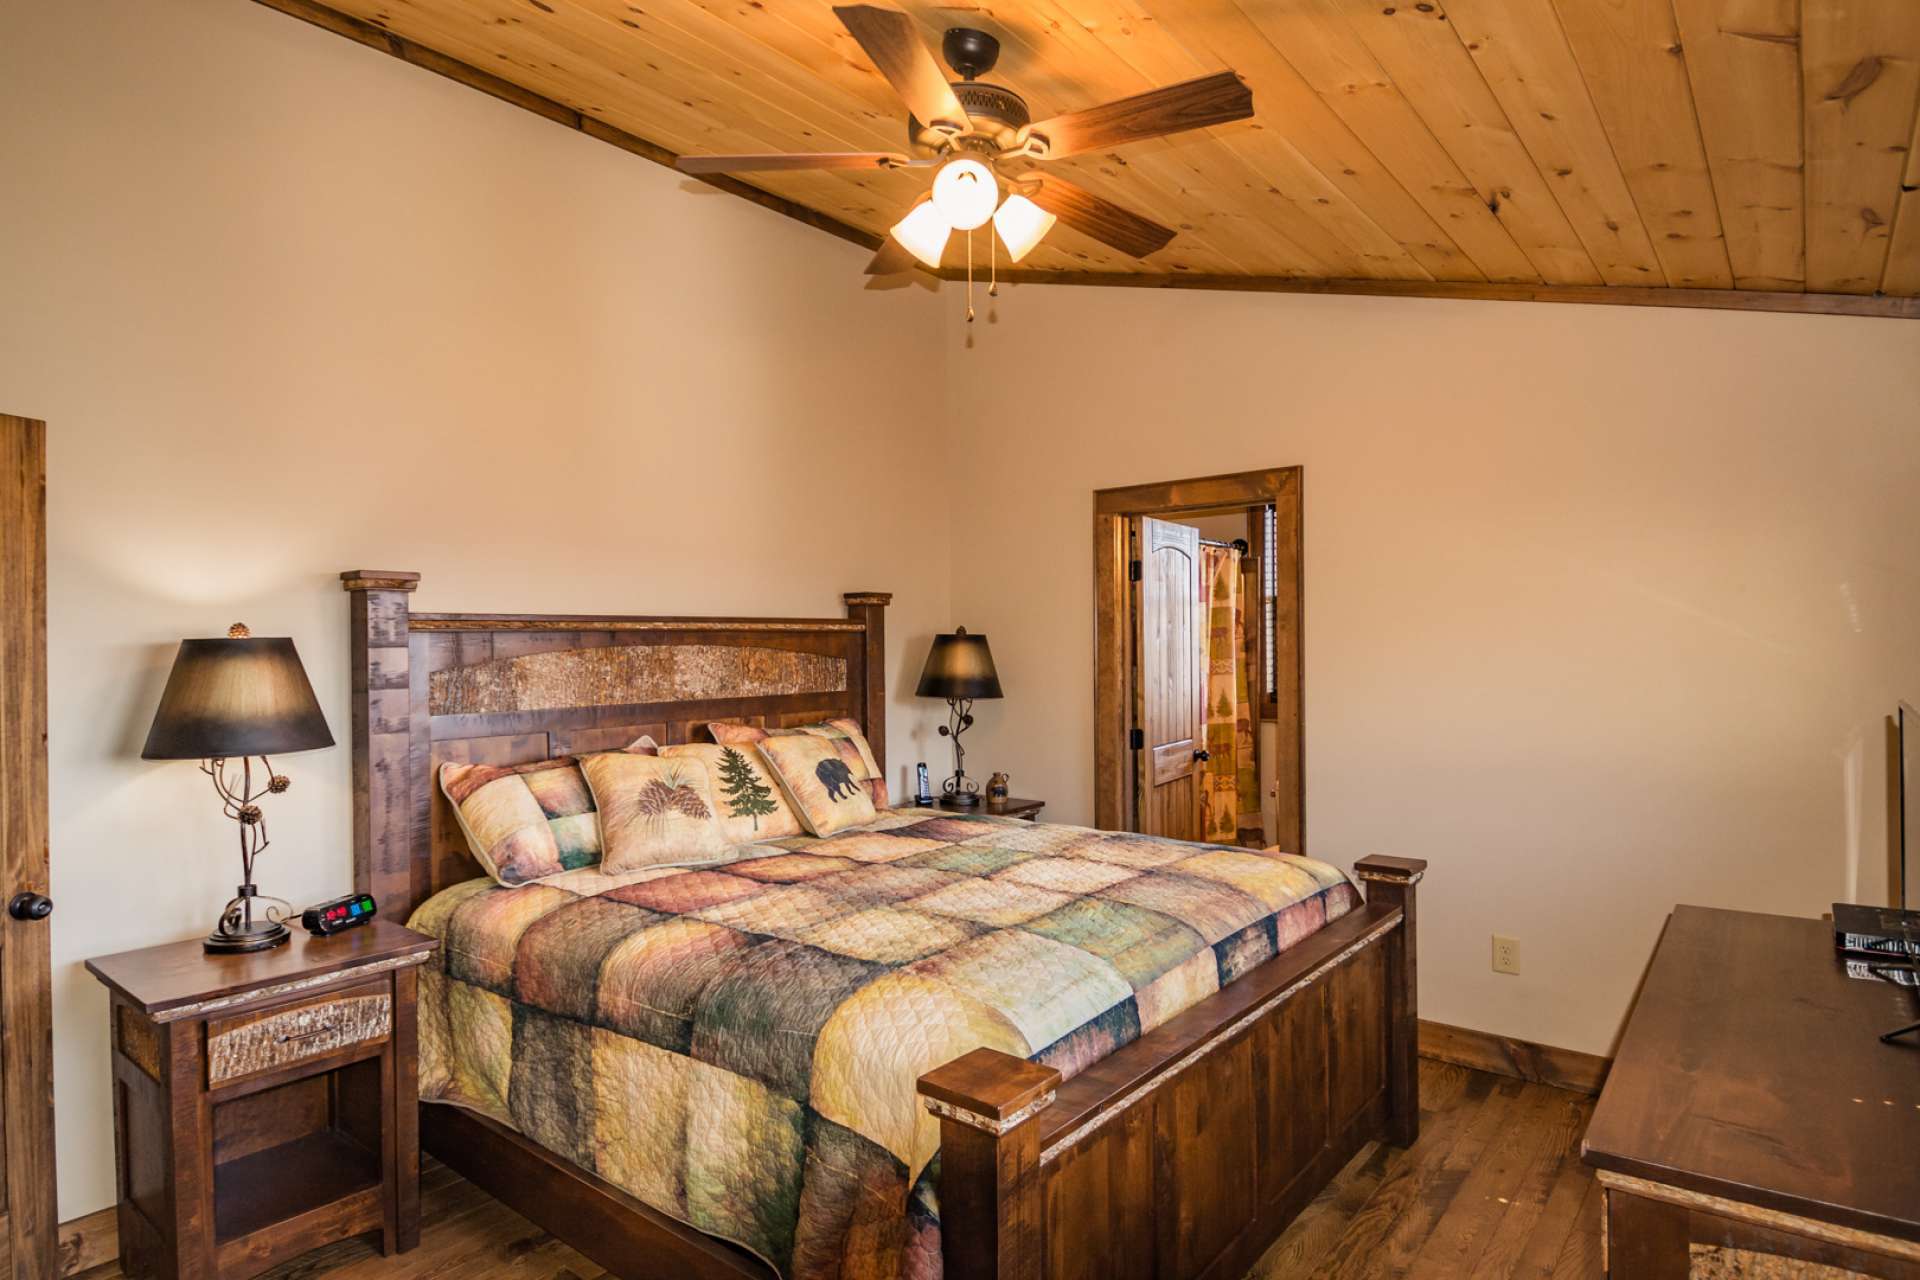 Two more spacious bedrooms are located on the upper level.